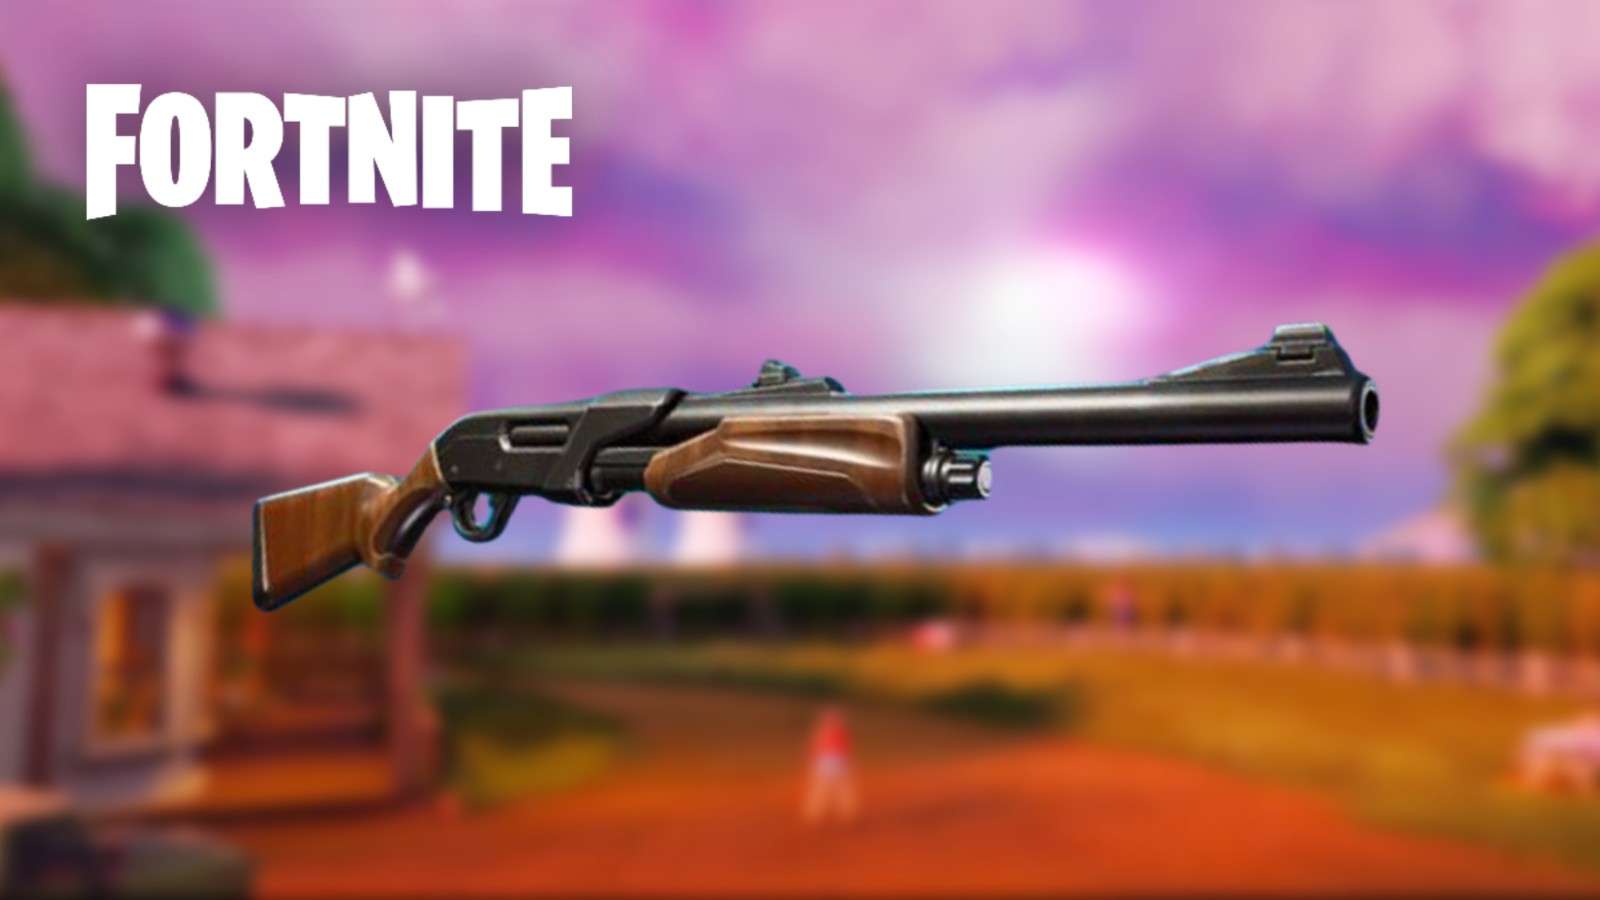 Fortnite unvaulted vaulted weapons